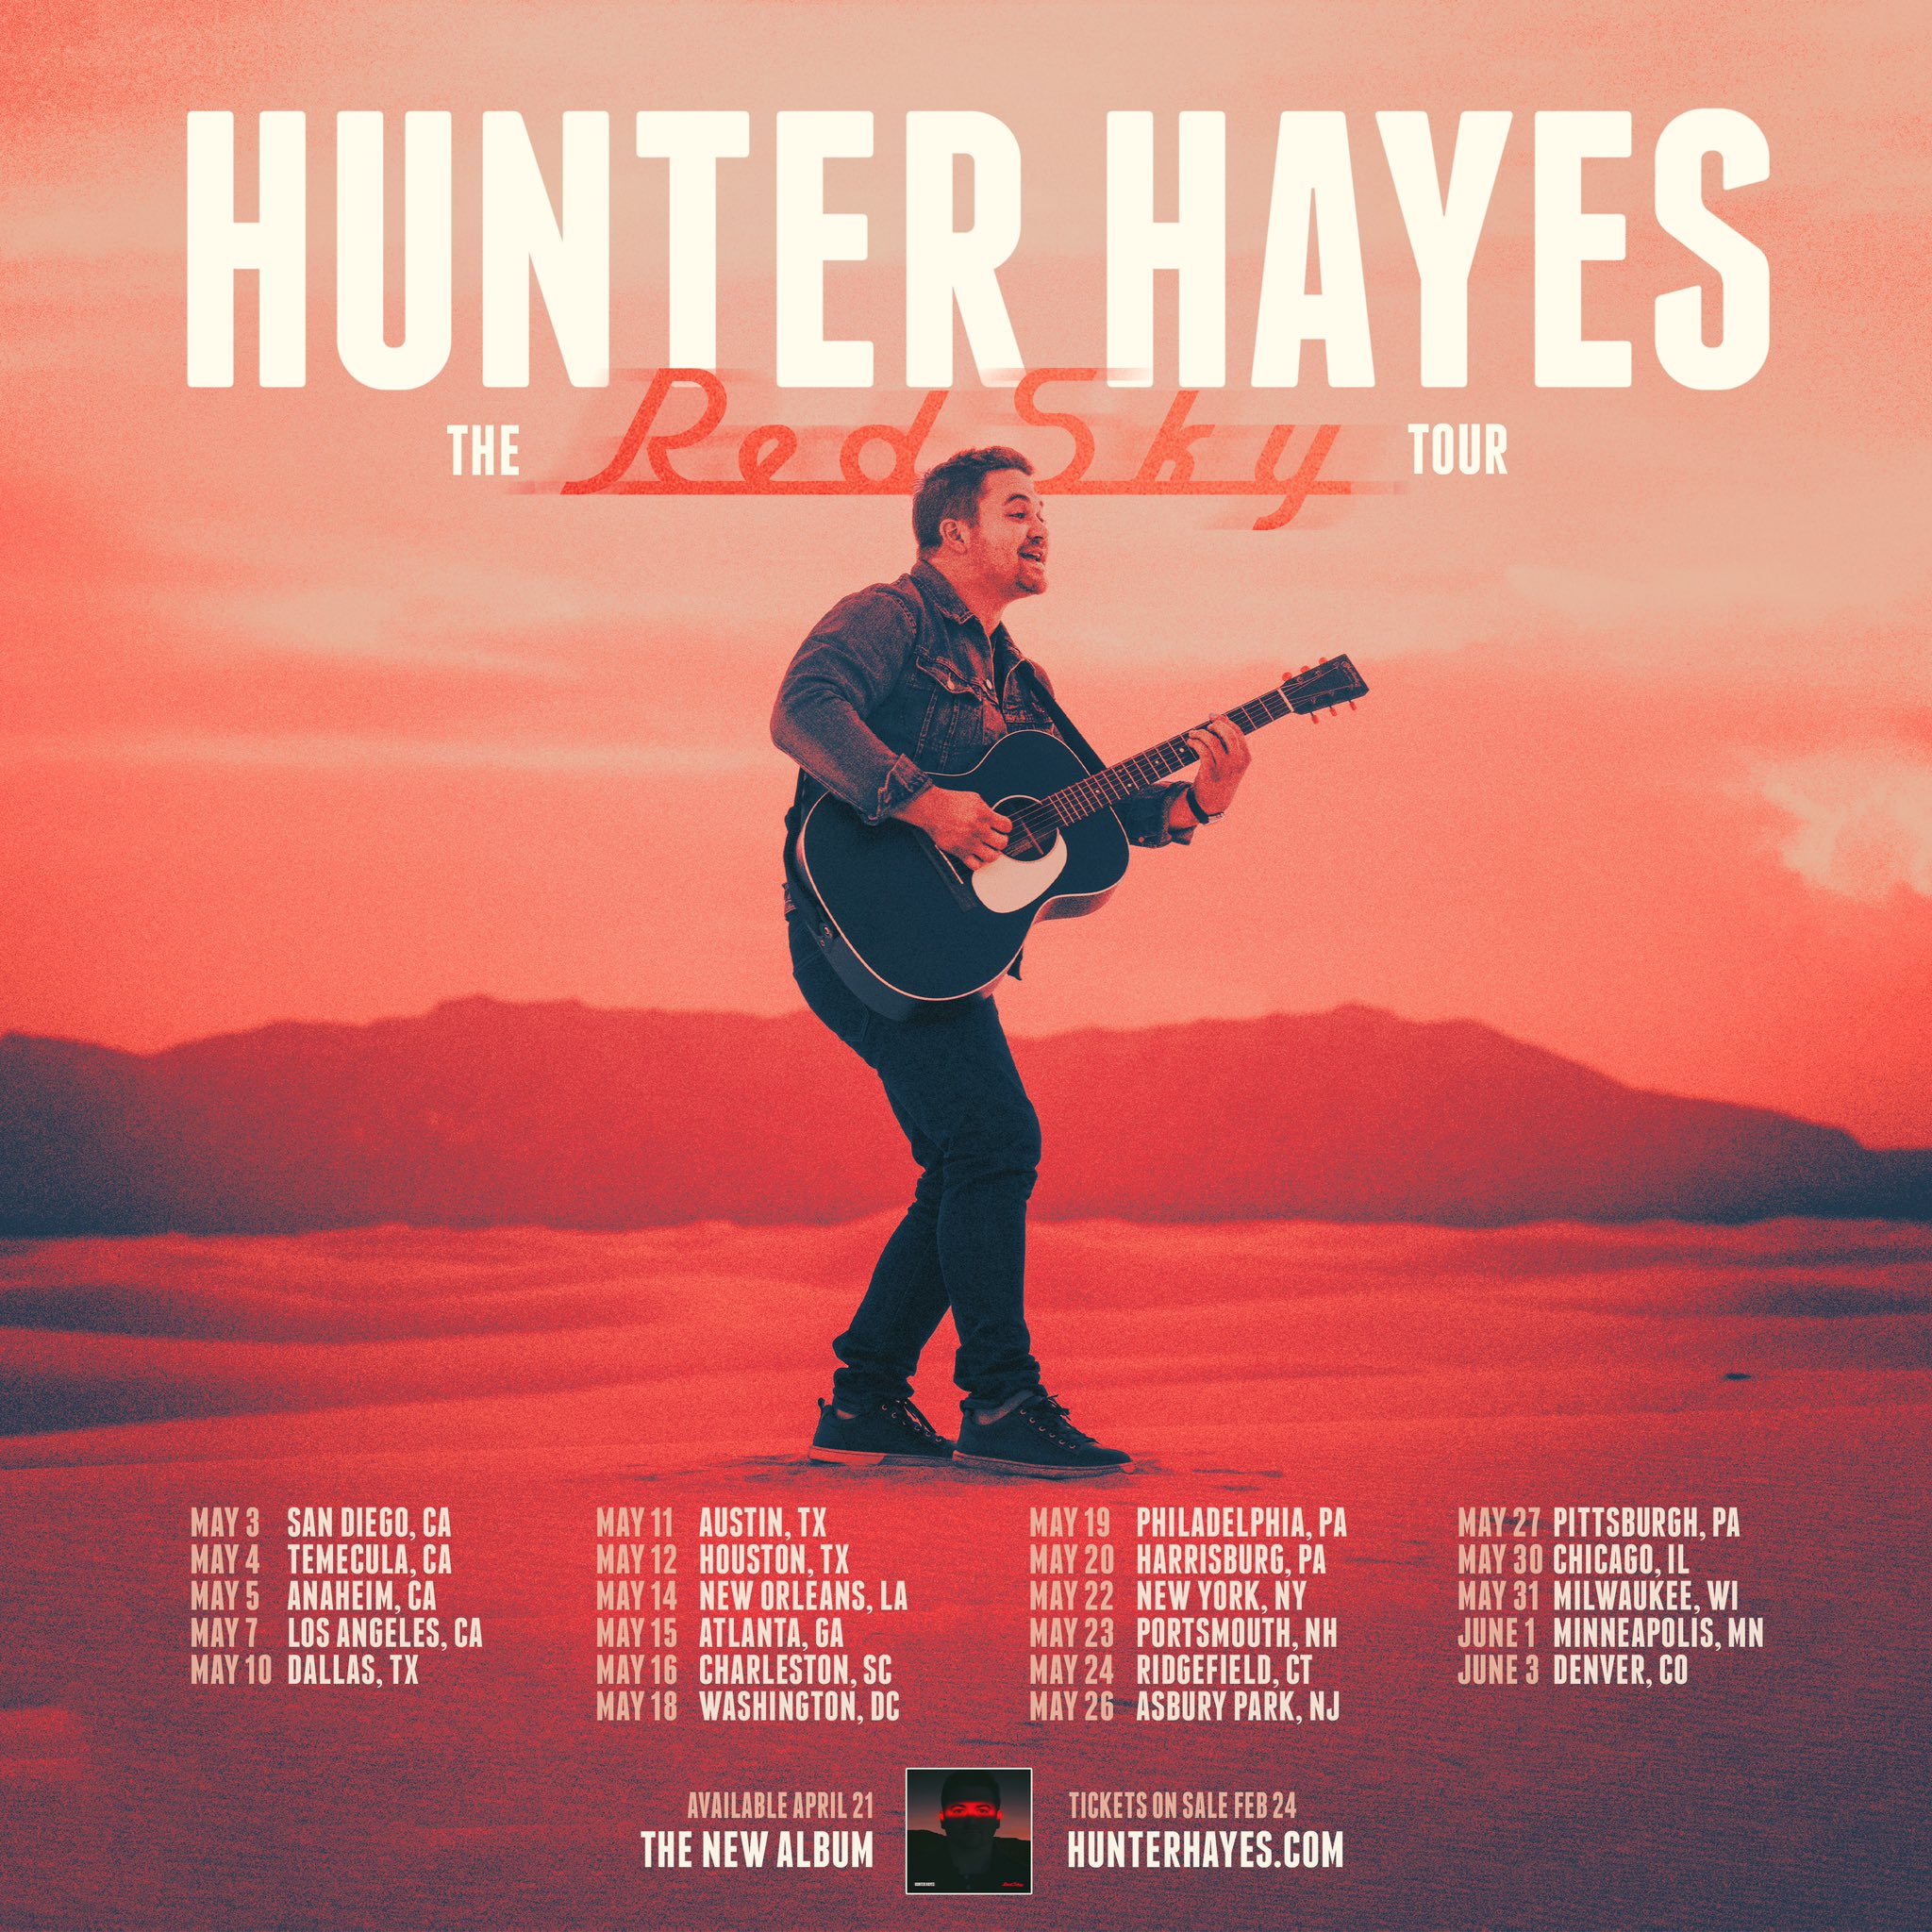 Zinloos Prime Monteur Hunter Hayes on Twitter: "It's finally happening friends… introducing THE  RED SKY TOUR! Coming to a city near you! On sale this Friday, pre sale  begins tomorrow. Sign up for access at